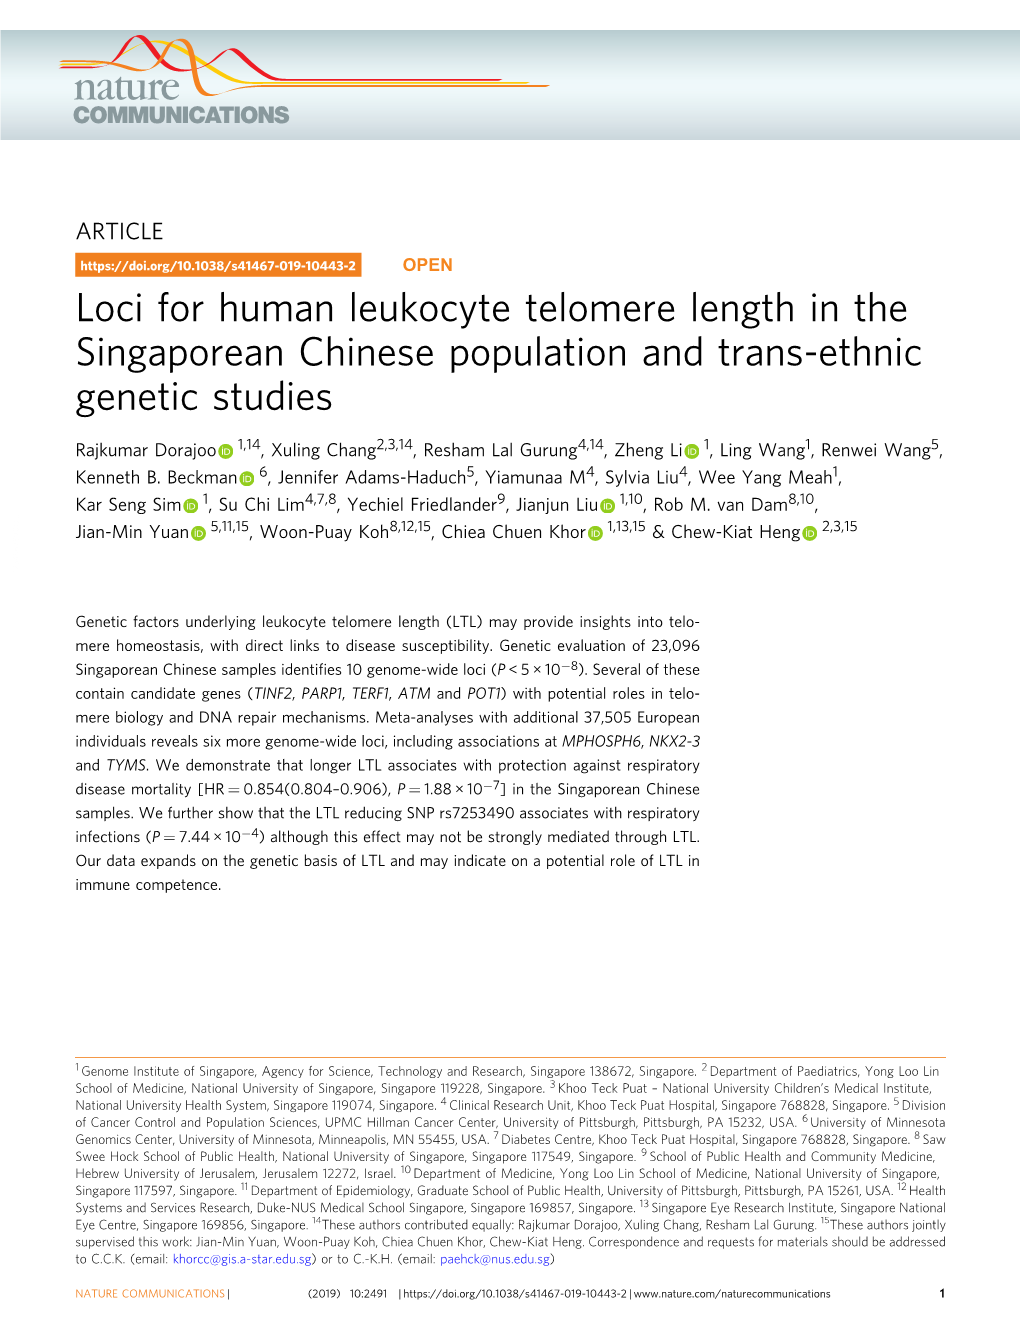 Loci for Human Leukocyte Telomere Length in the Singaporean Chinese Population and Trans-Ethnic Genetic Studies